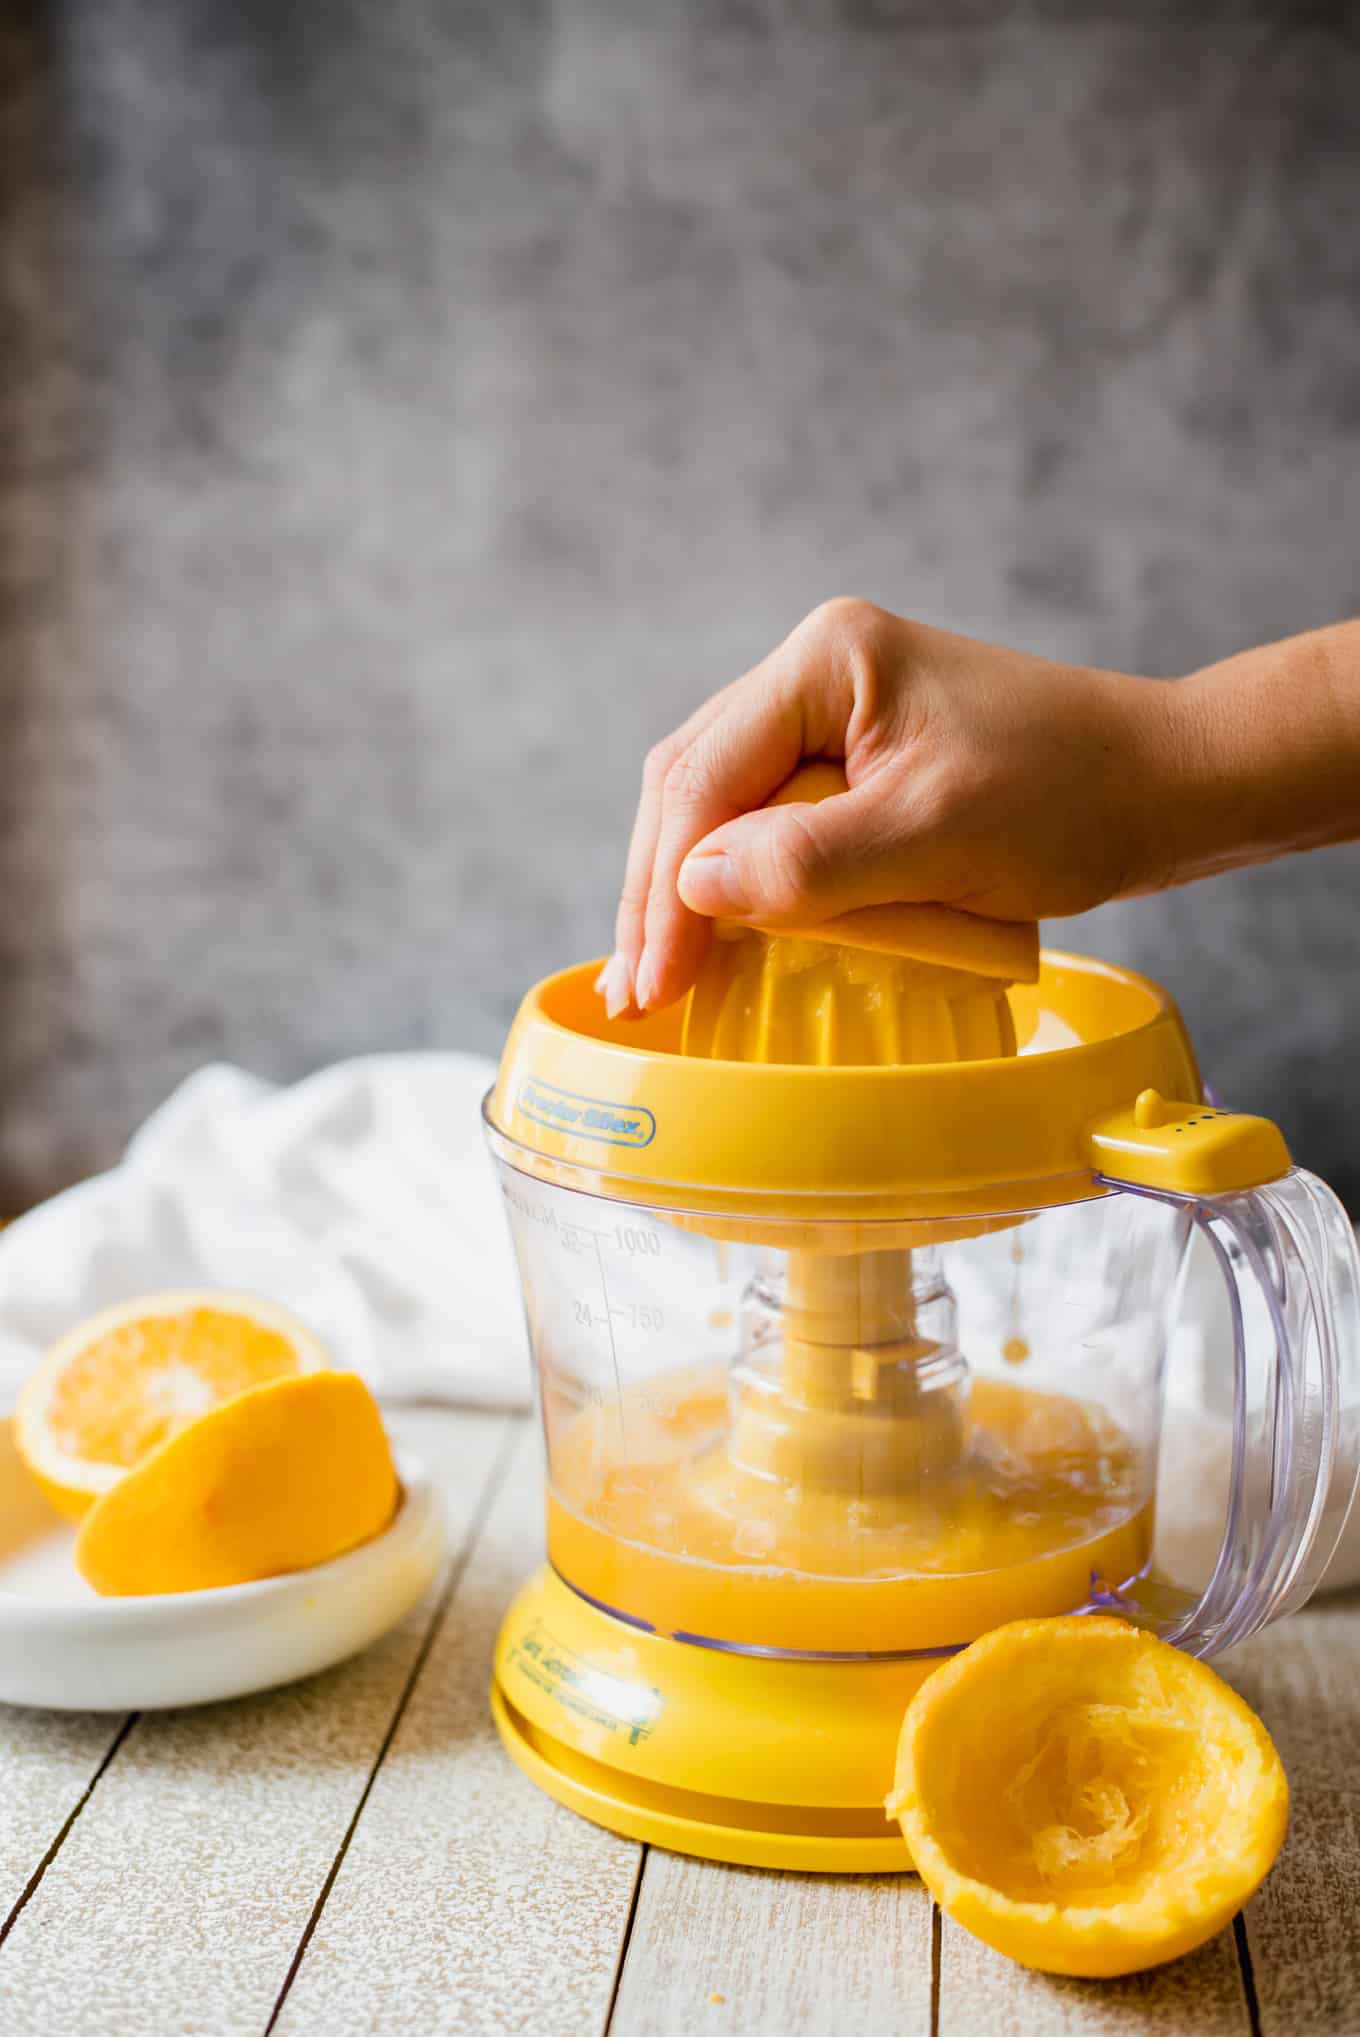 A hand pressing an orange against an electric juicer.